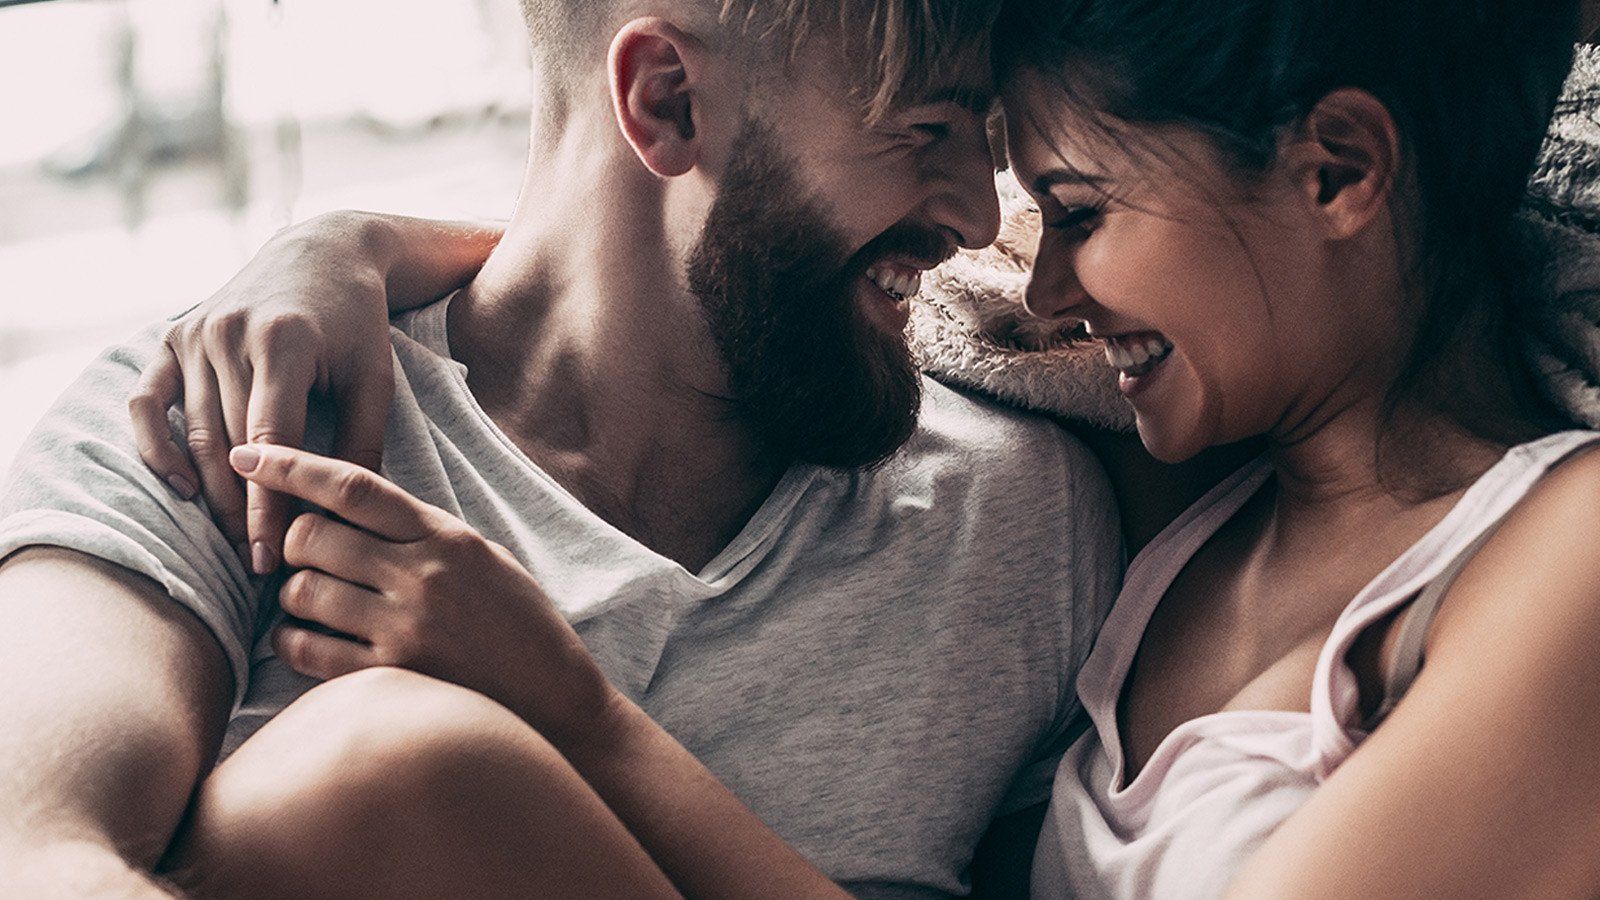 Report: Women Prefer To Date Men With Beards